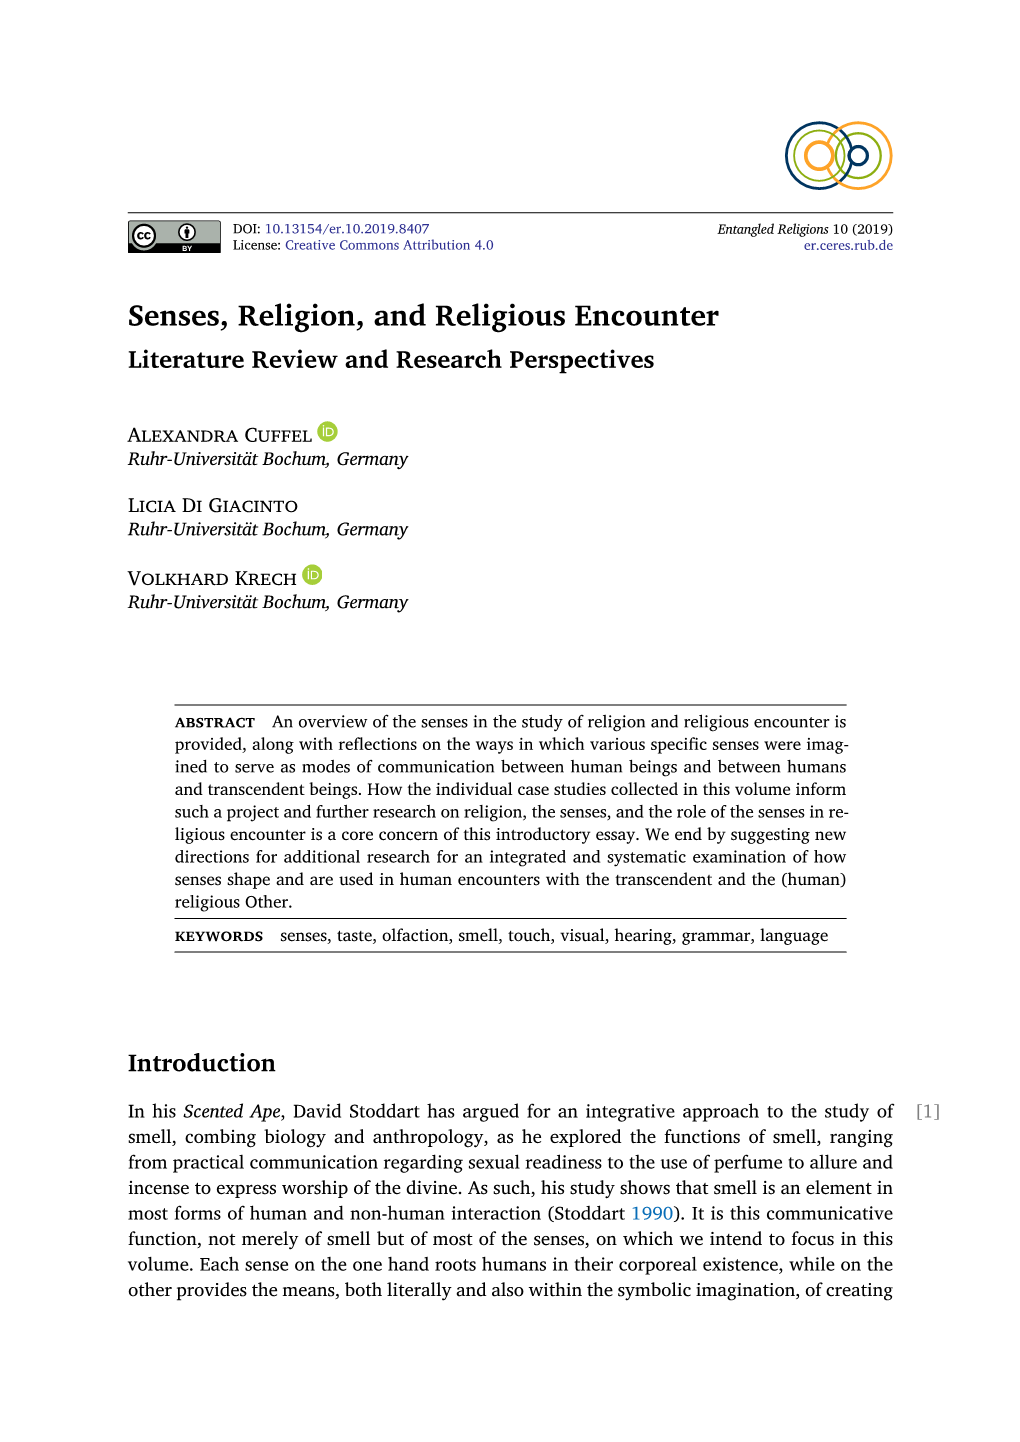 Senses, Religion, and Religious Encounter Literature Review and Research Perspectives